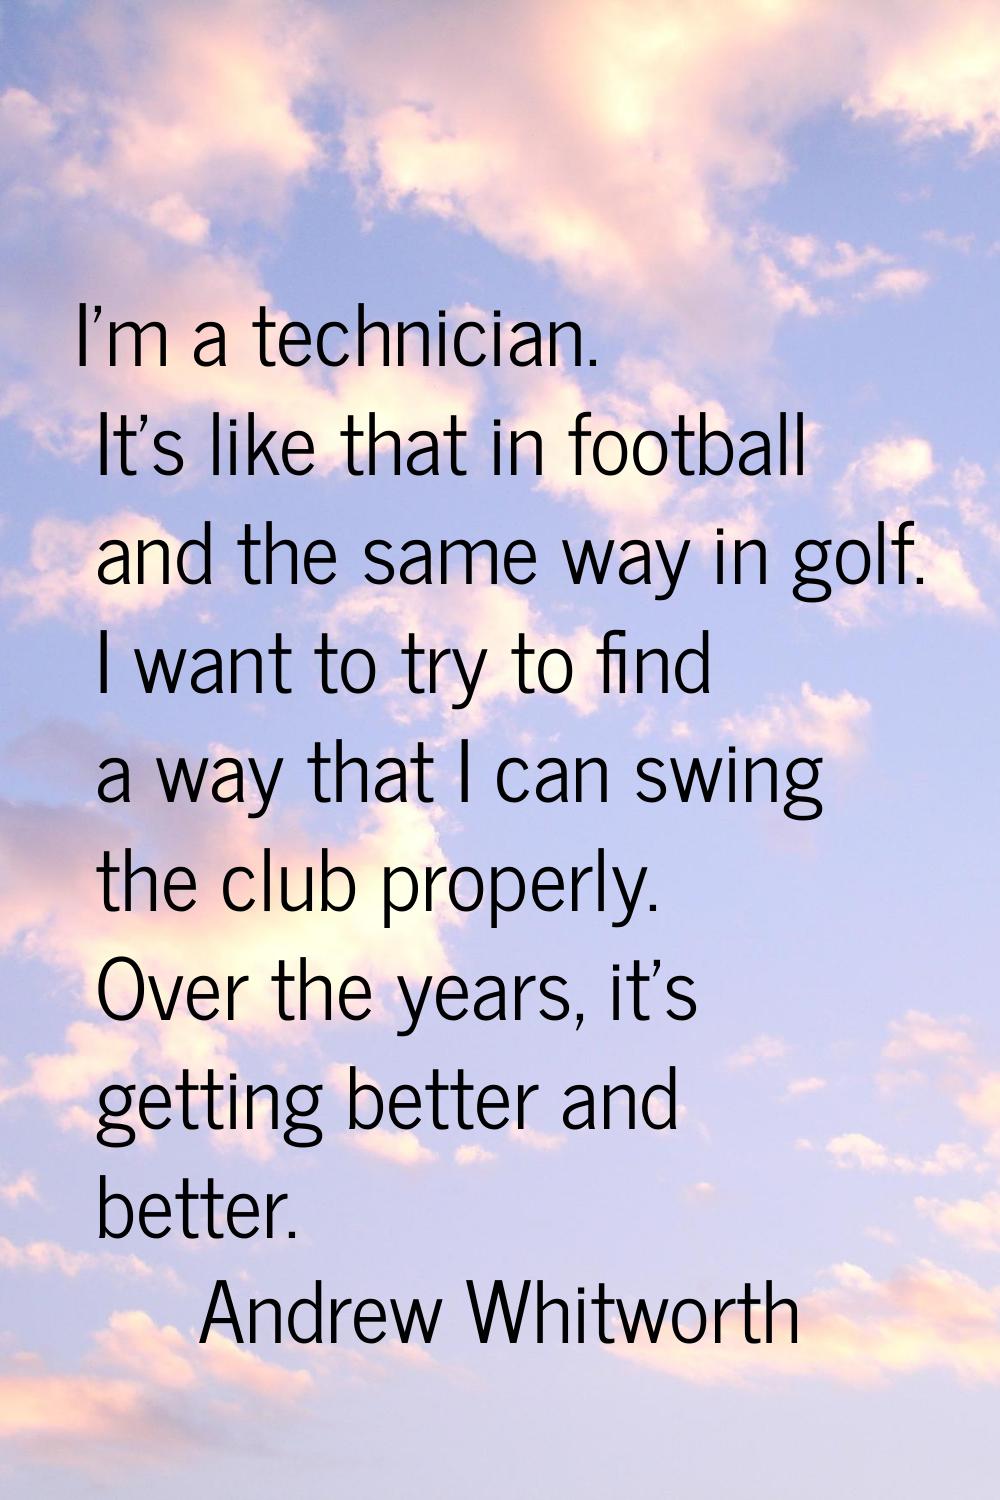 I'm a technician. It's like that in football and the same way in golf. I want to try to find a way 